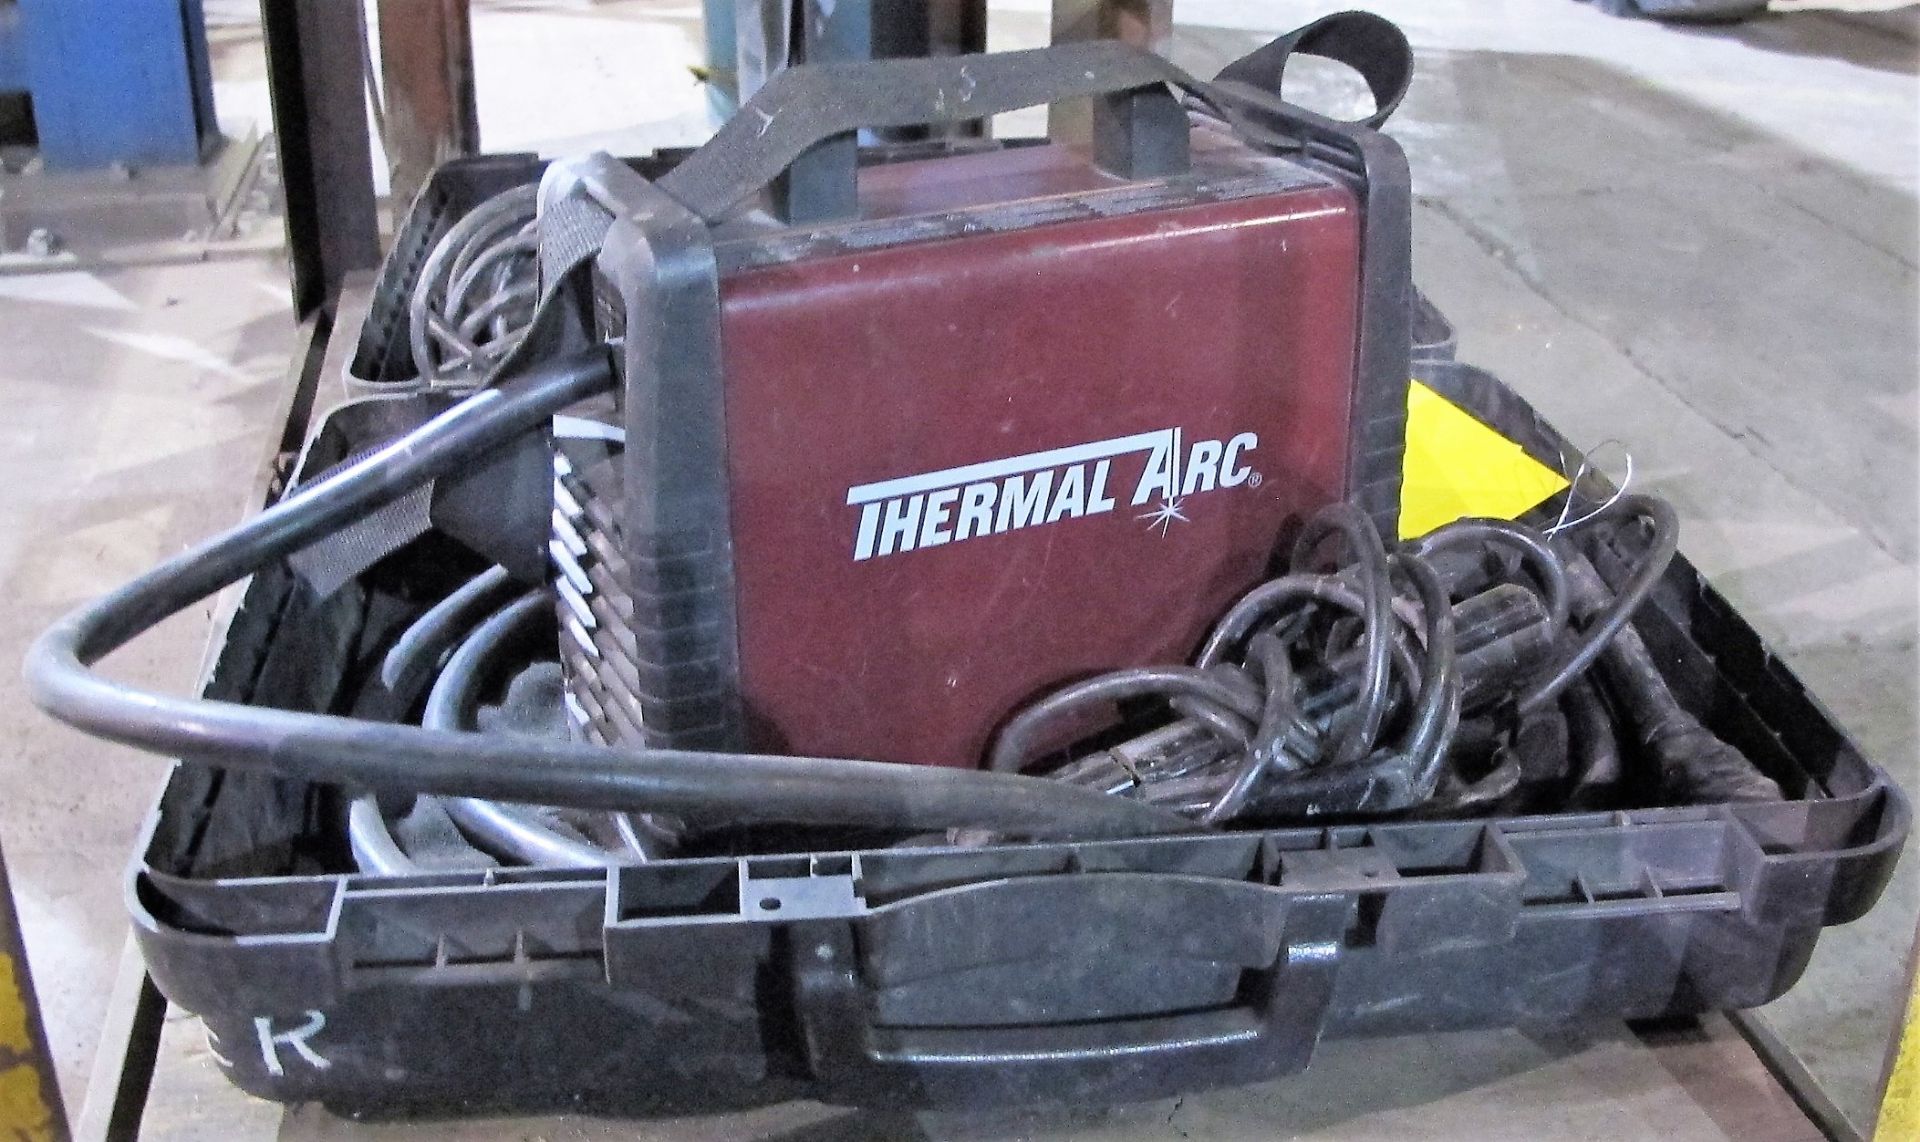 THERMAL ARC 95S THERMAL ARC INVERTER ARC WELDER W/ CABLES, CASE - Image 2 of 3